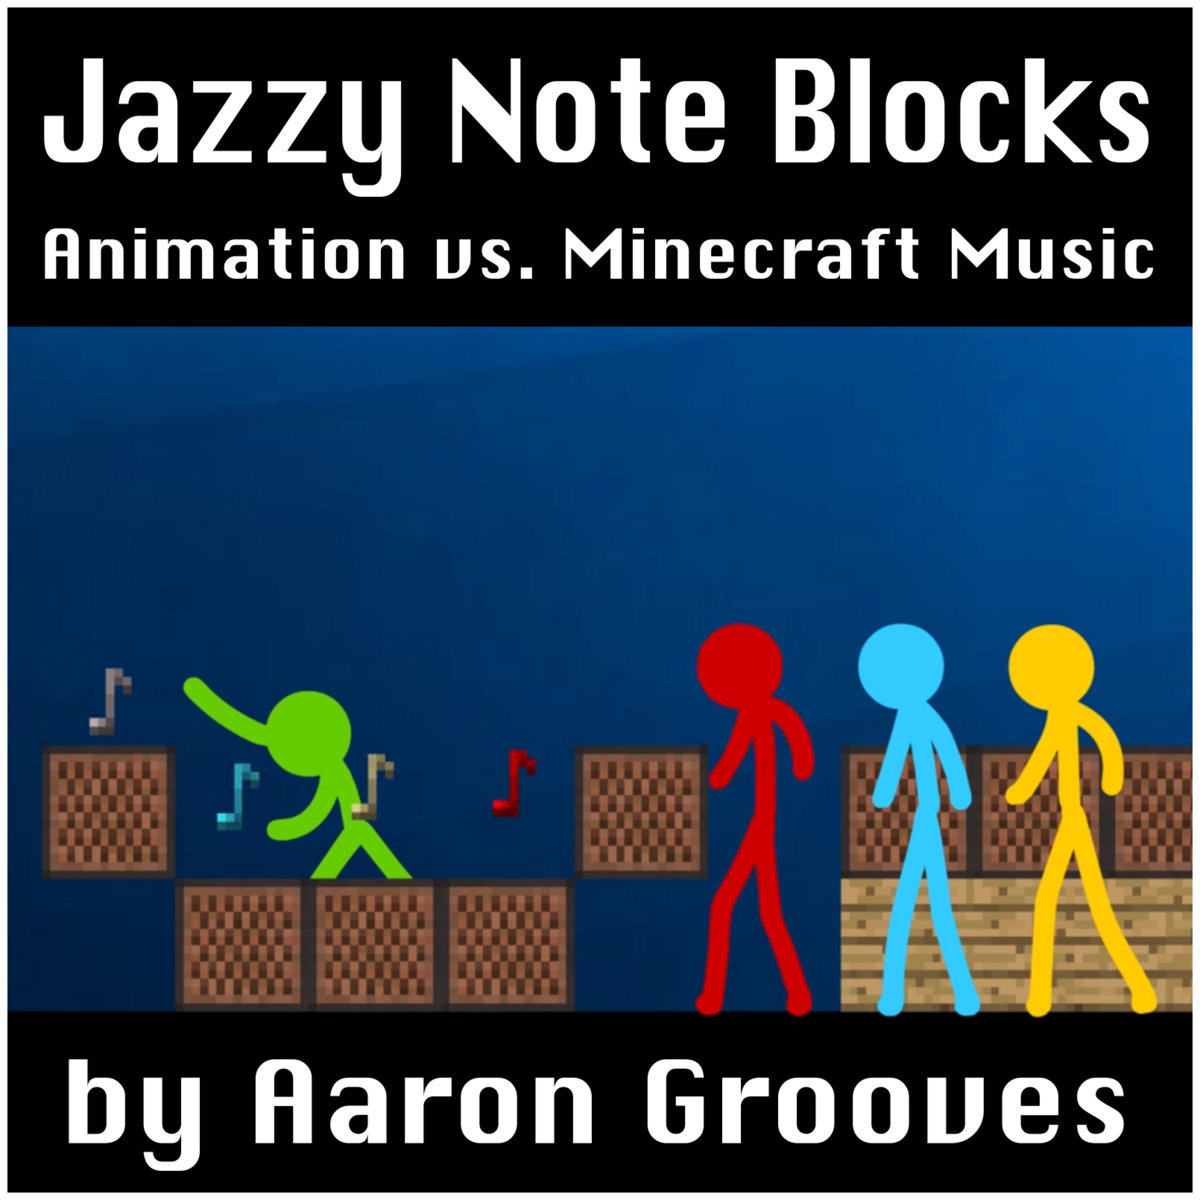 Some Opening Music (From Animation vs. Minecraft)